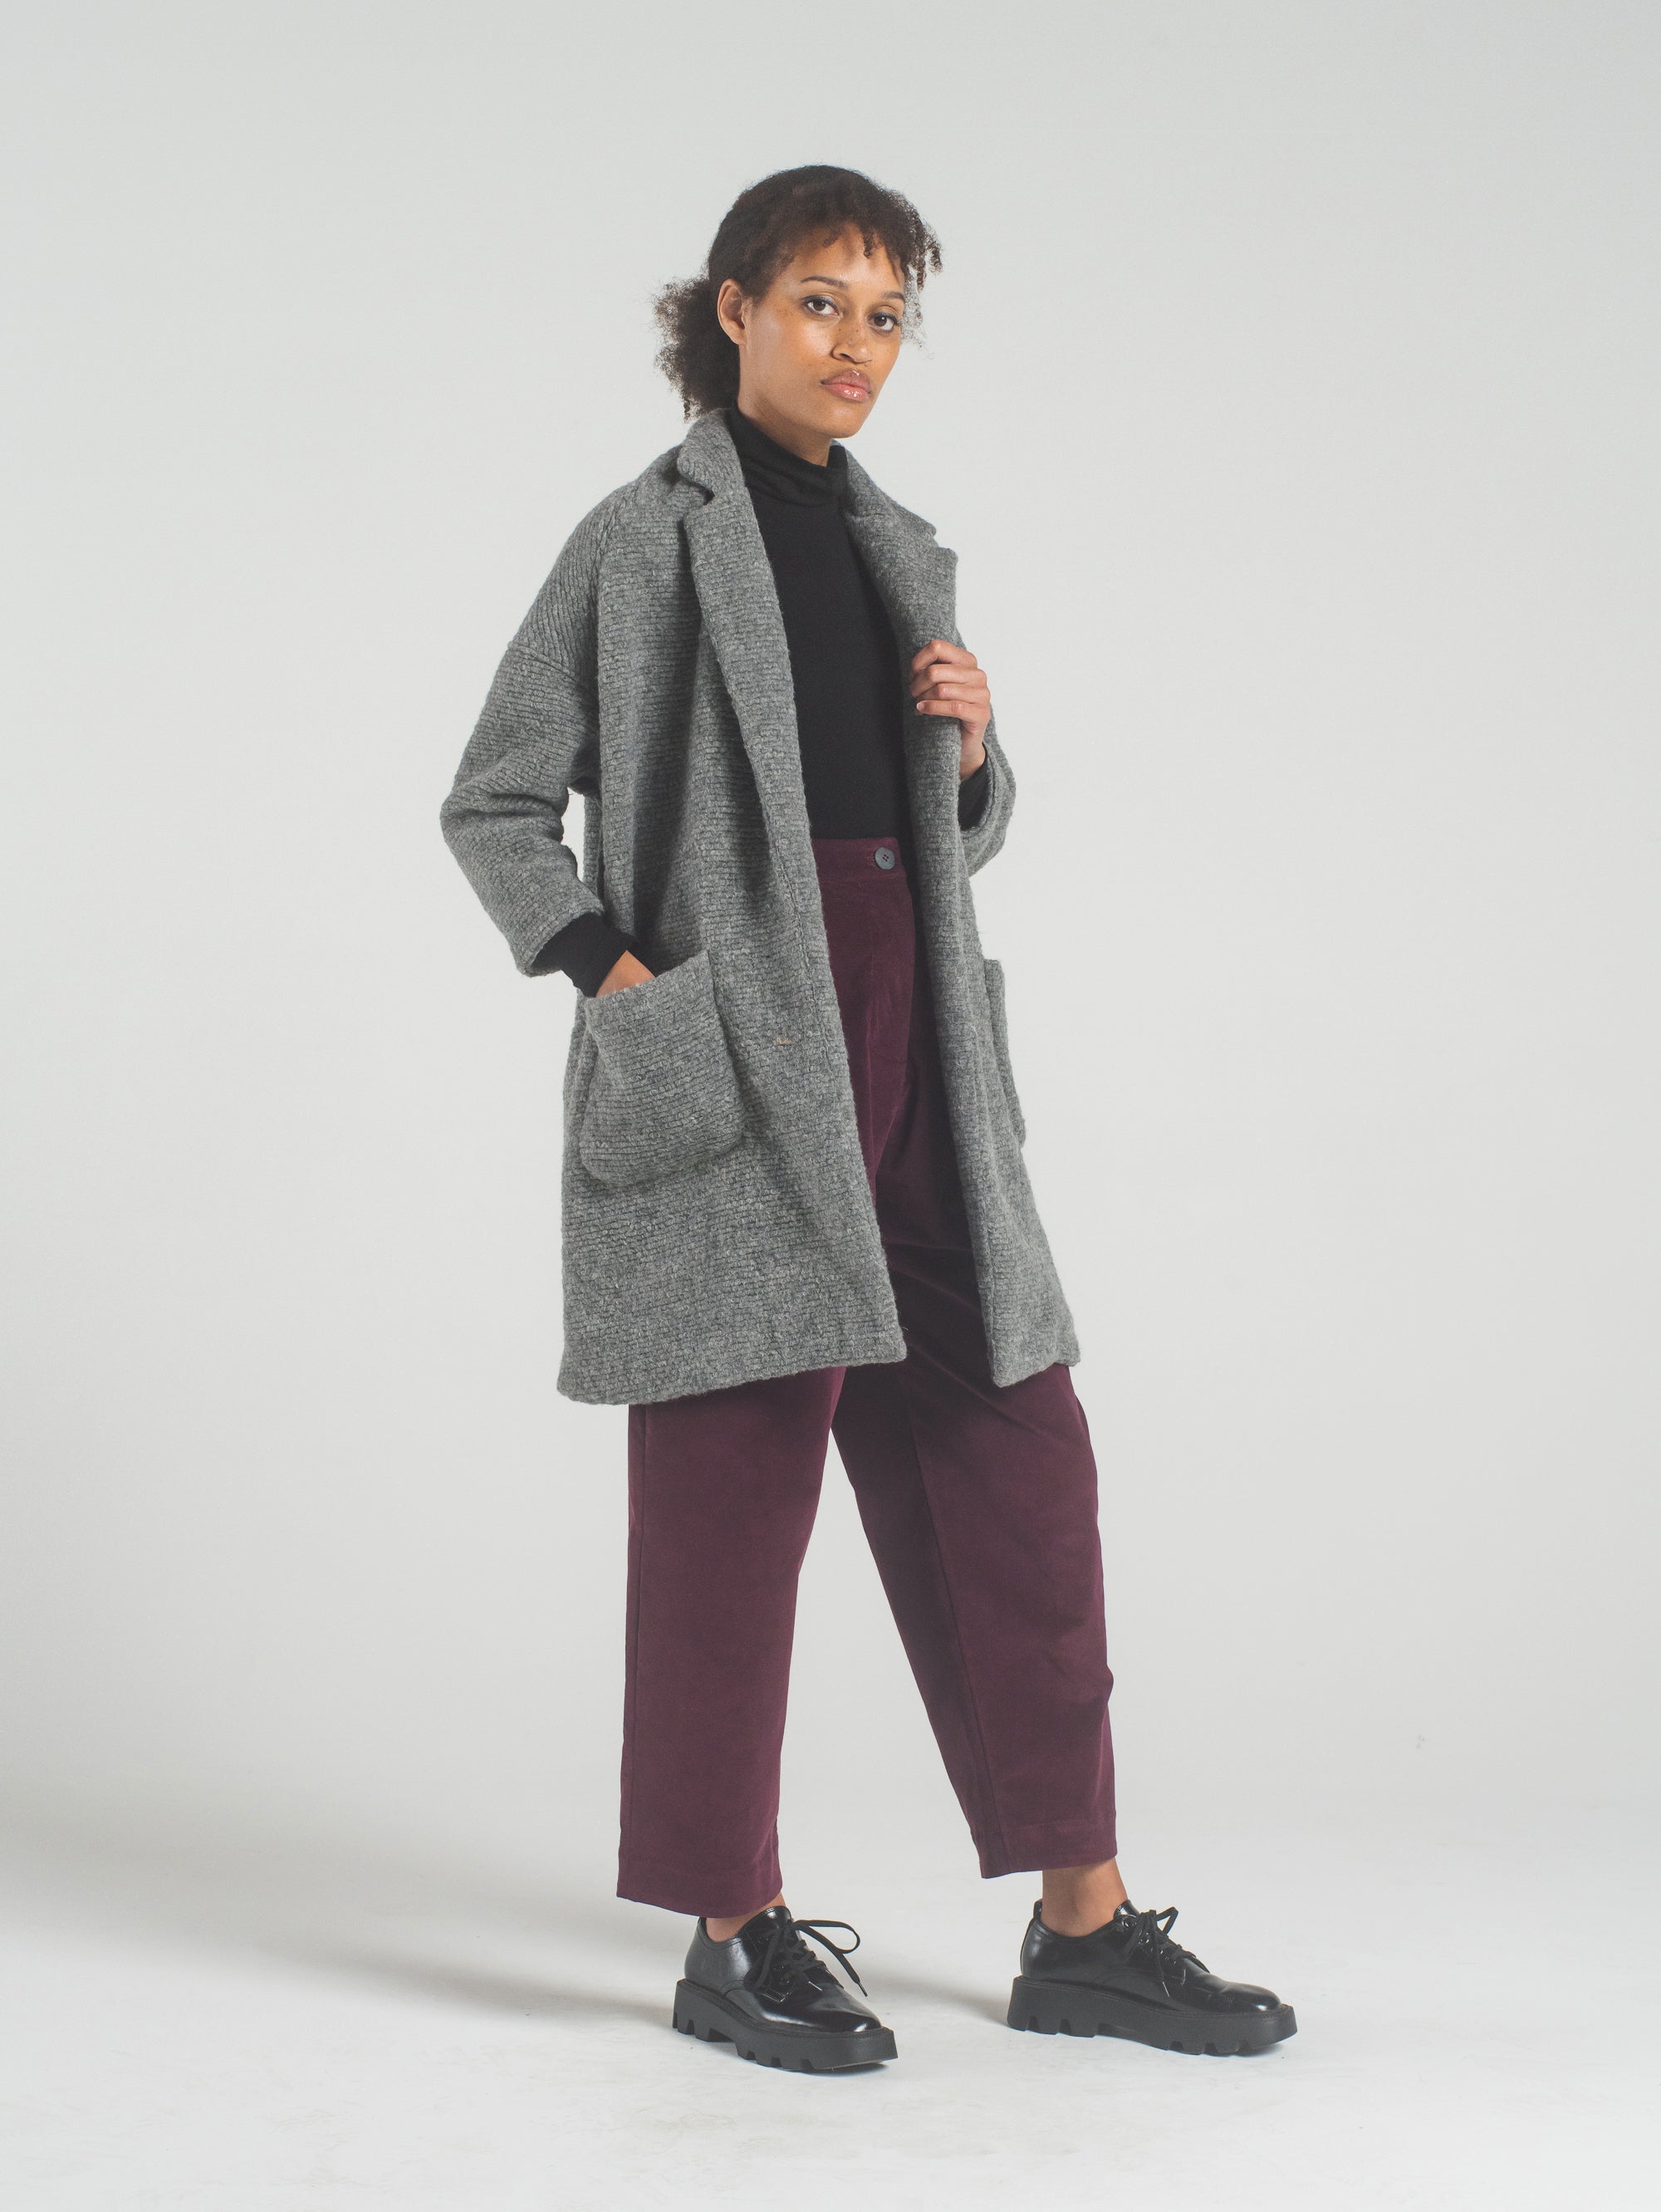 SAMPLE SALE - Anais Jacket in Heather Wool - SMALL